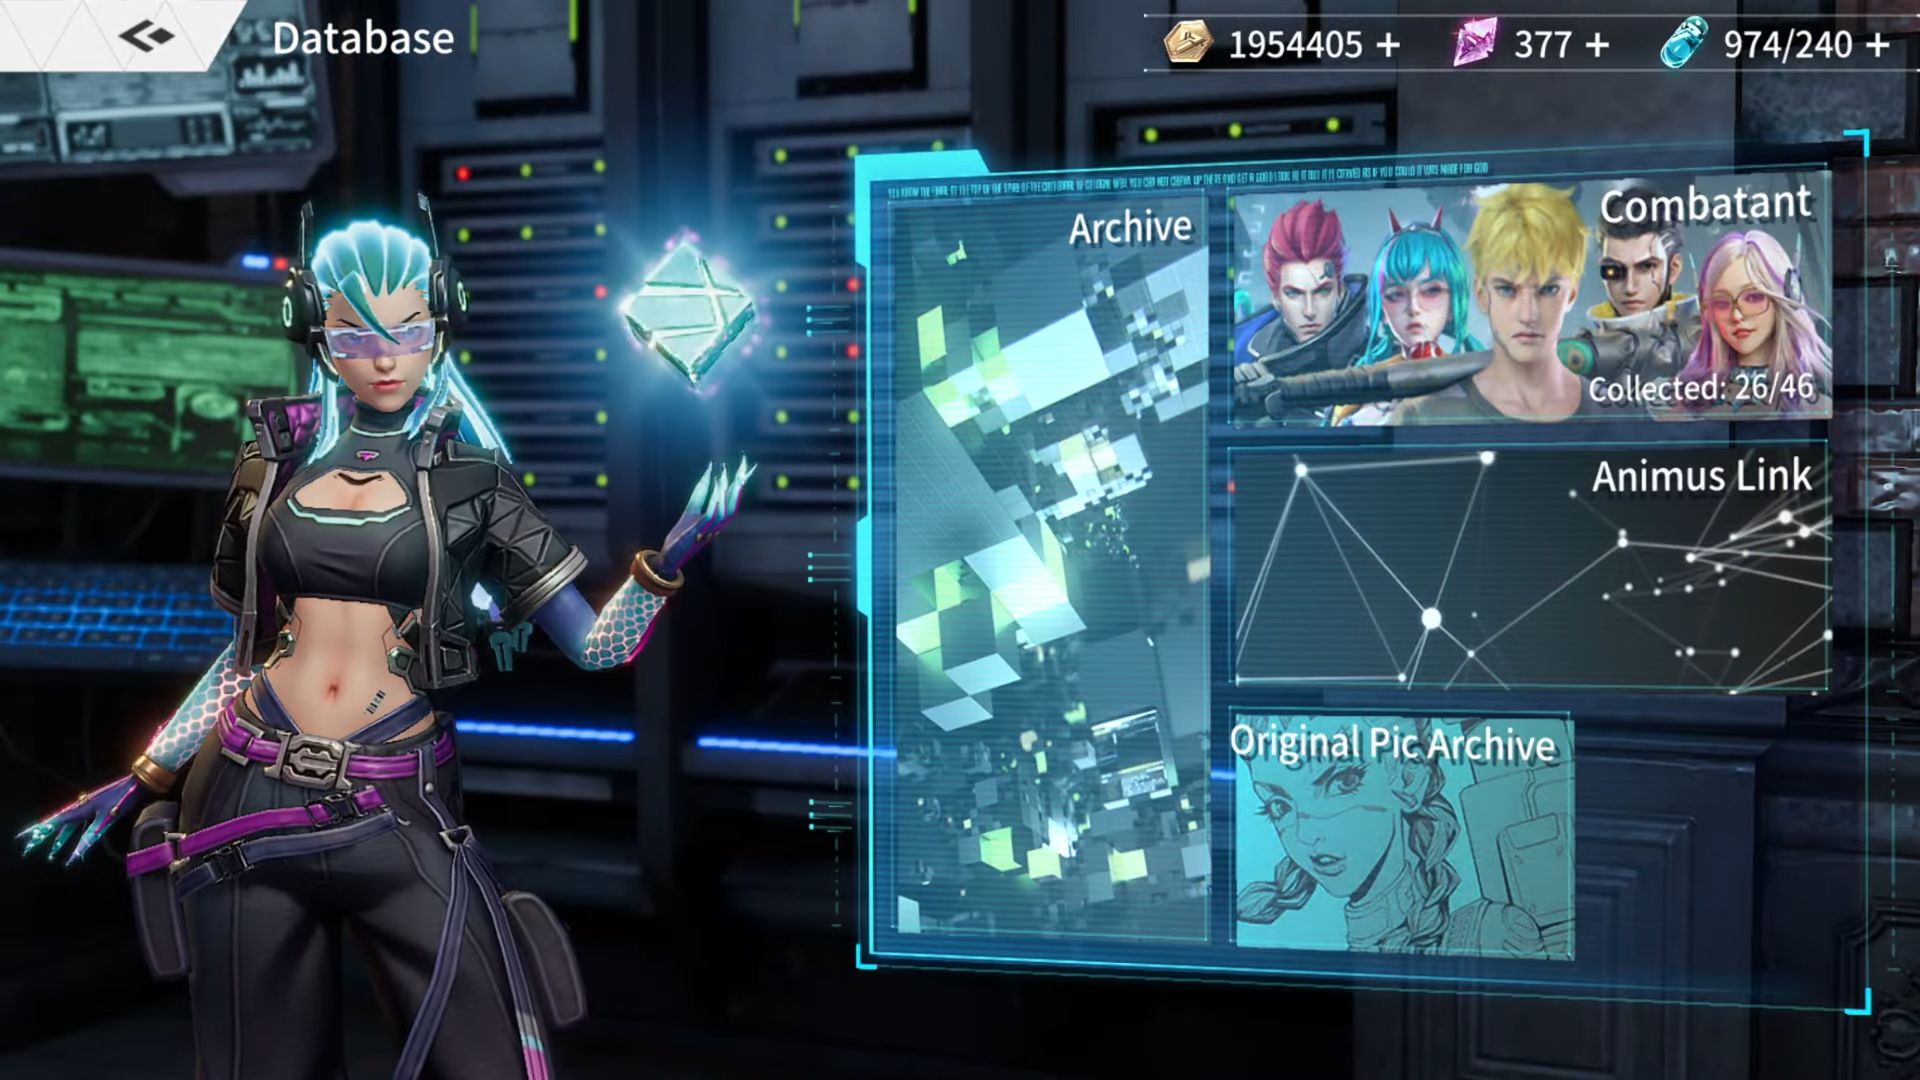 Rise of Cyber - Android game screenshots.